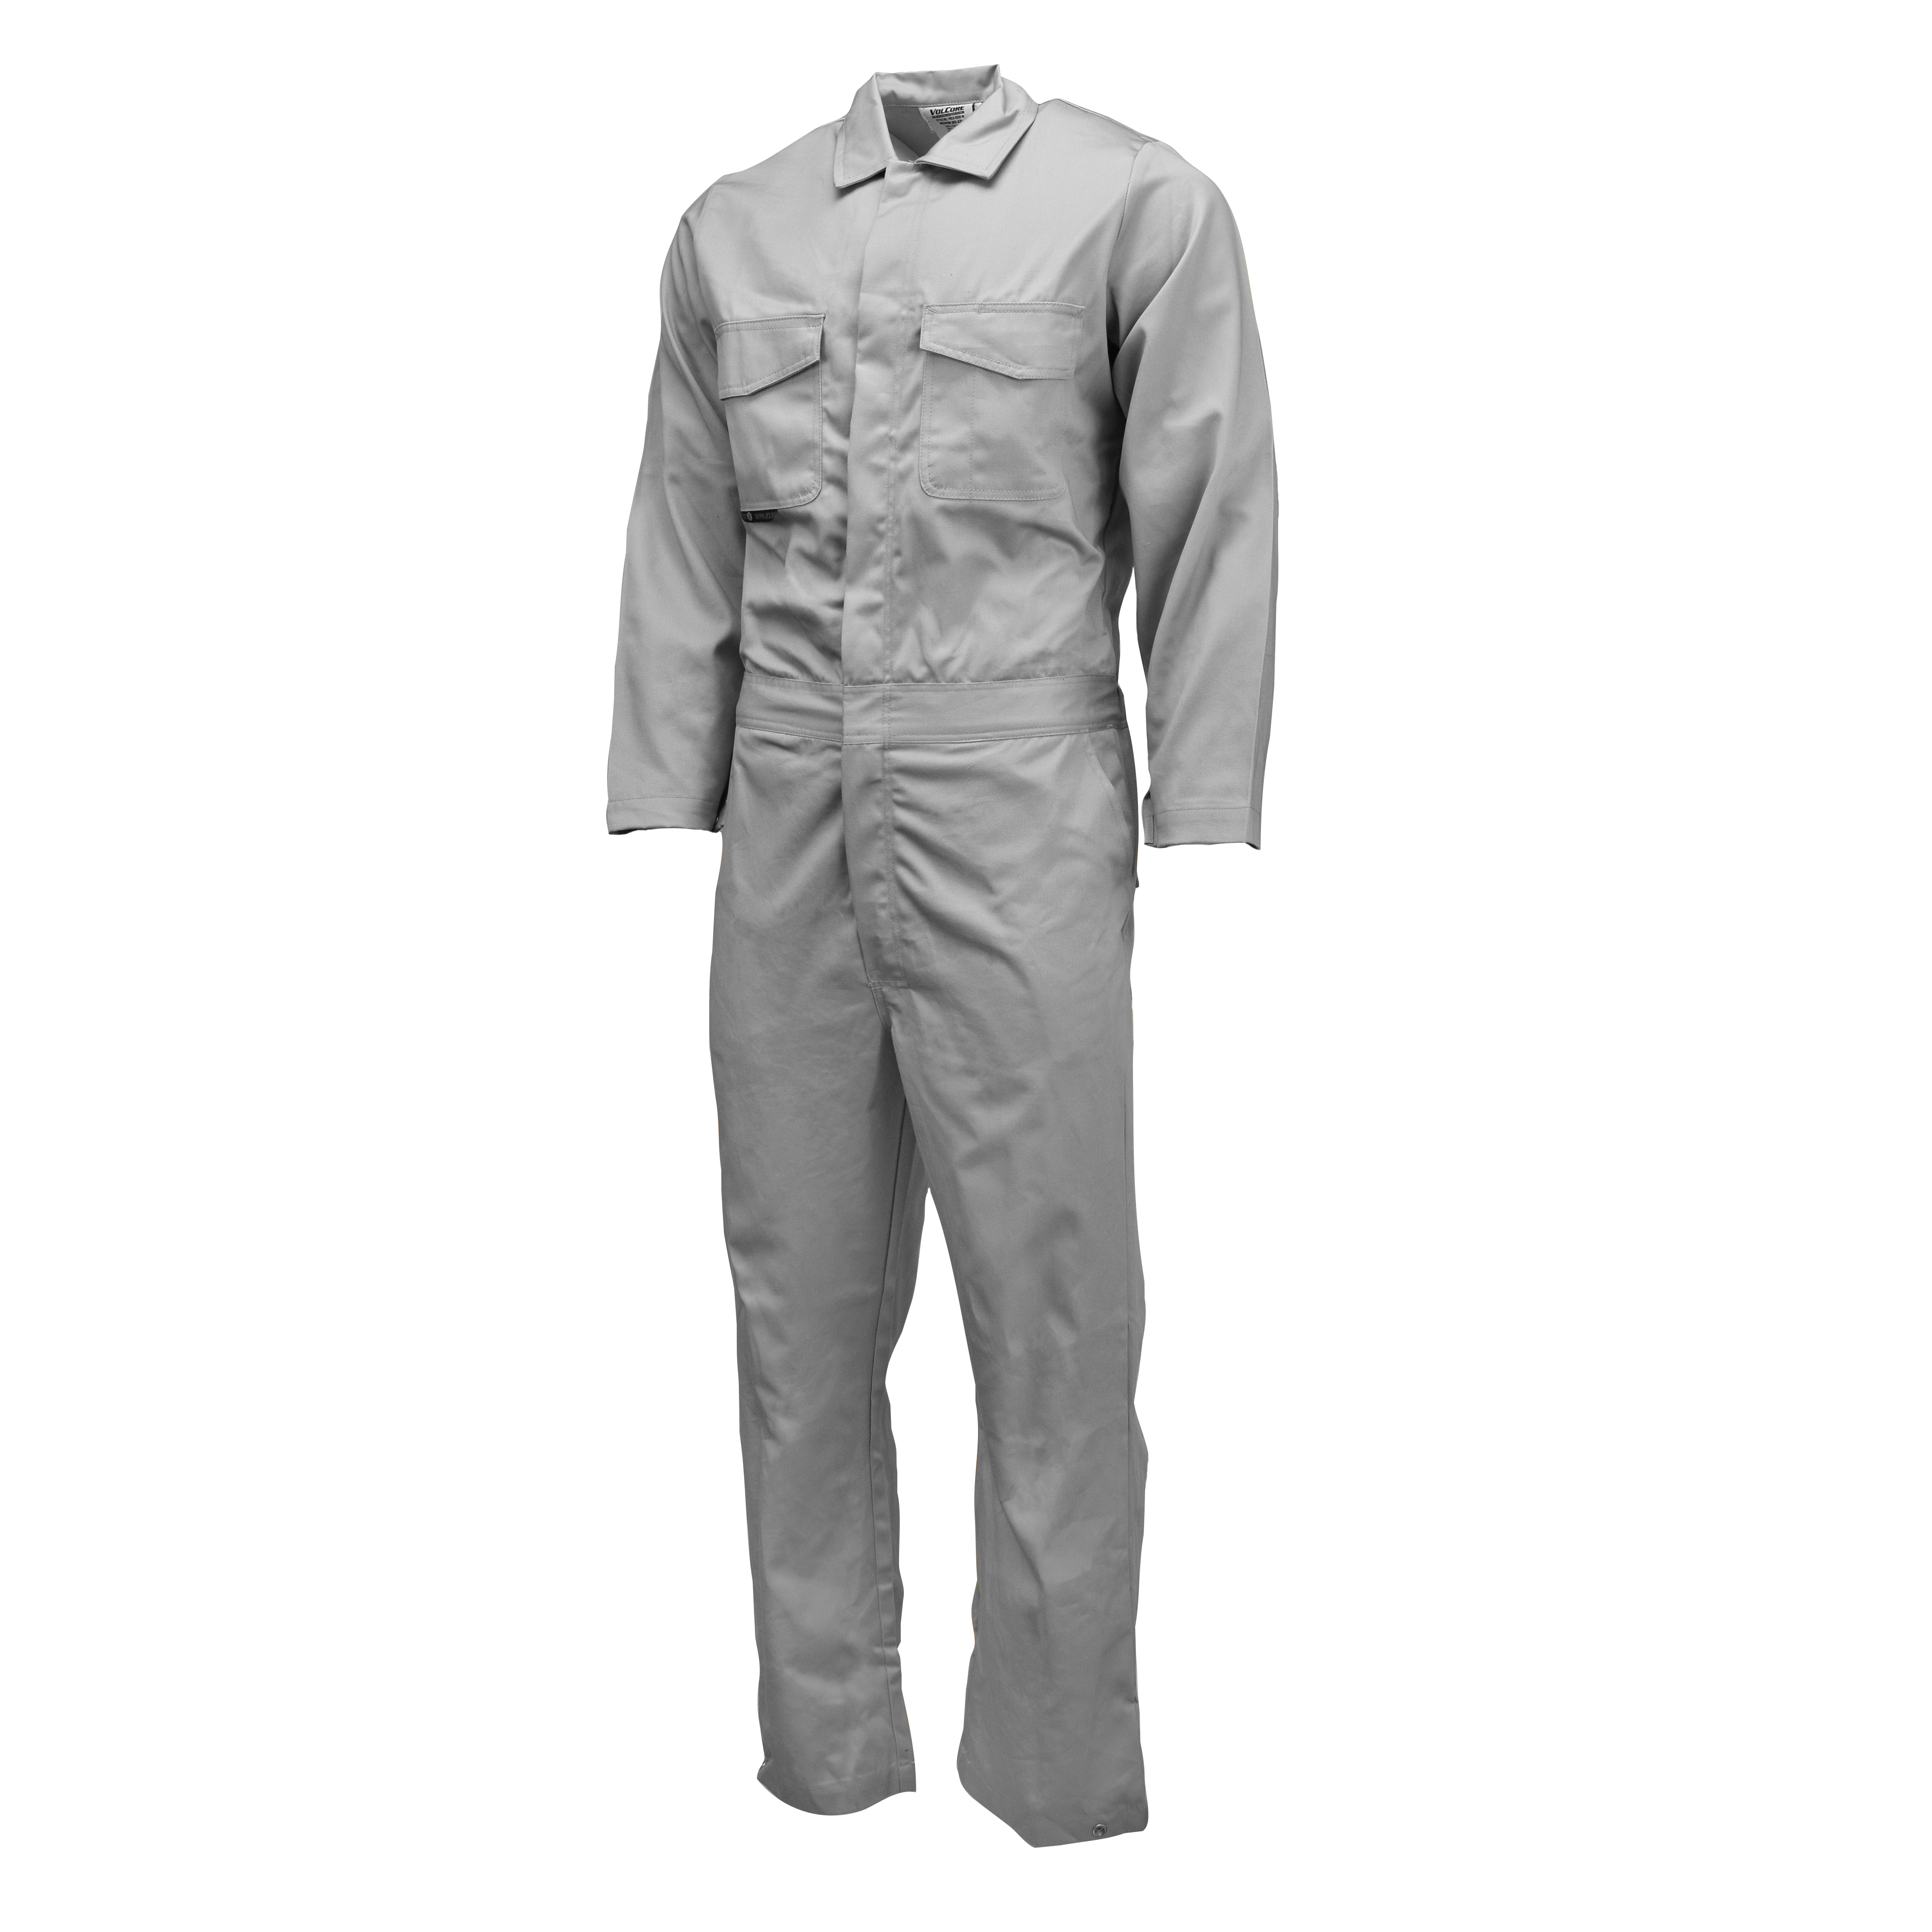 FRCA-003 VolCore™ Cotton FR Coverall - Gray - Size 2X